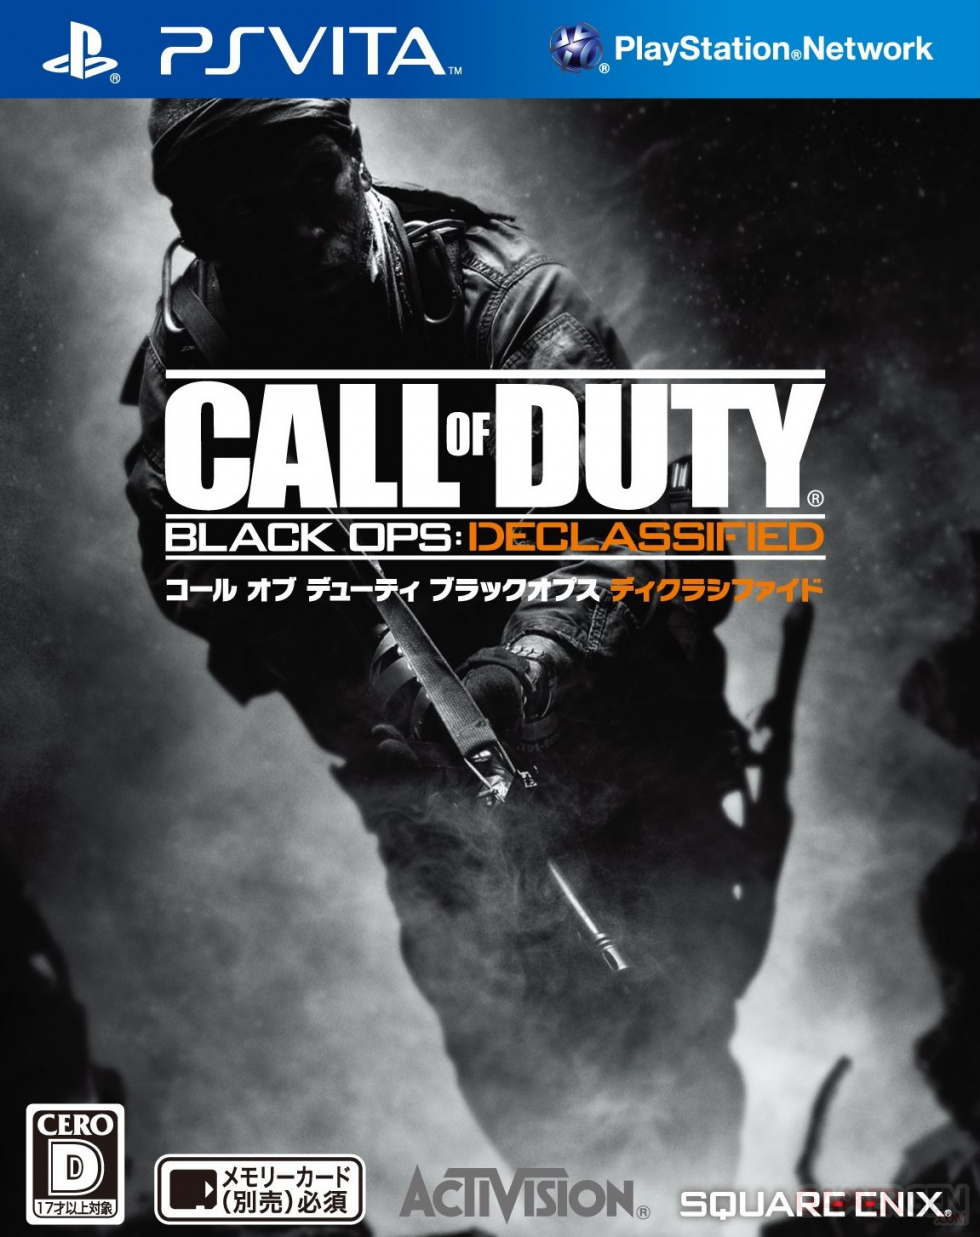 Call of duty black ops declassified jaquette jap covers 30.11.2012.